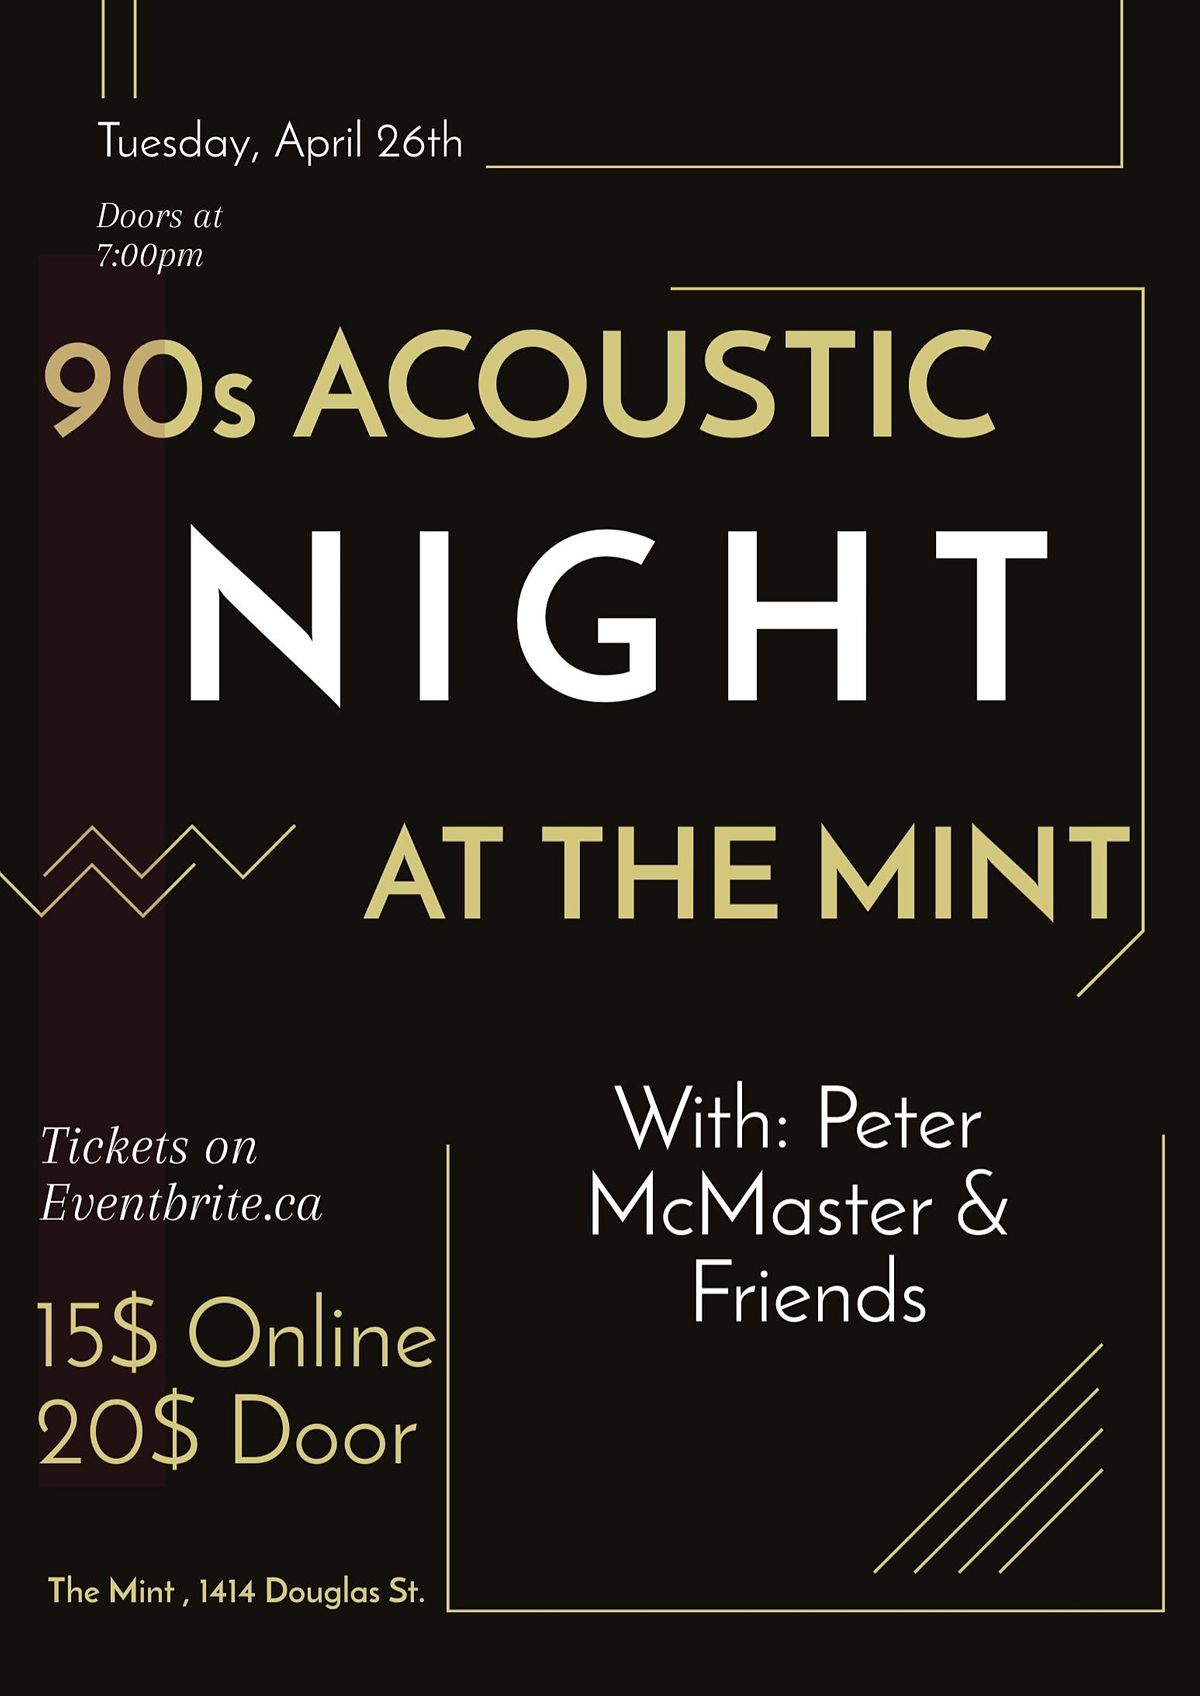 90s Acoustic Night at THE MINT